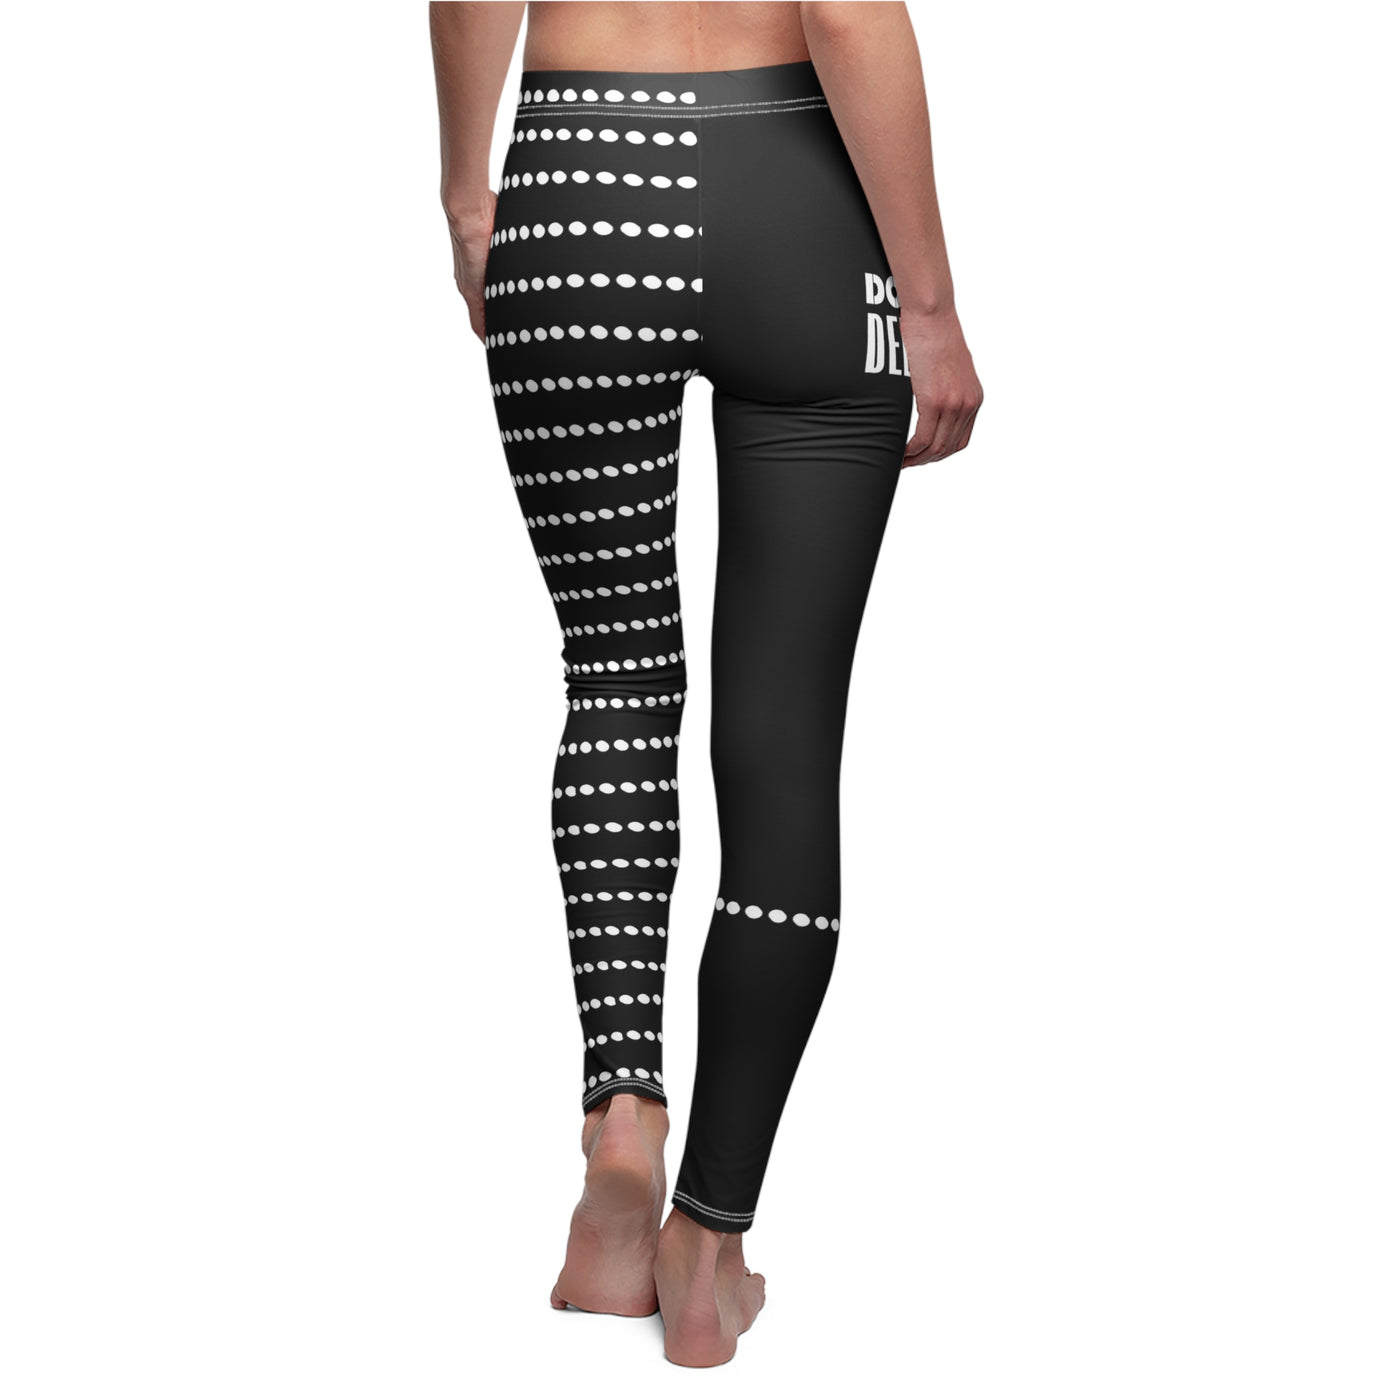 DOTTED DELIGHTS Women's Cut & Sew Casual Leggings (AOP)